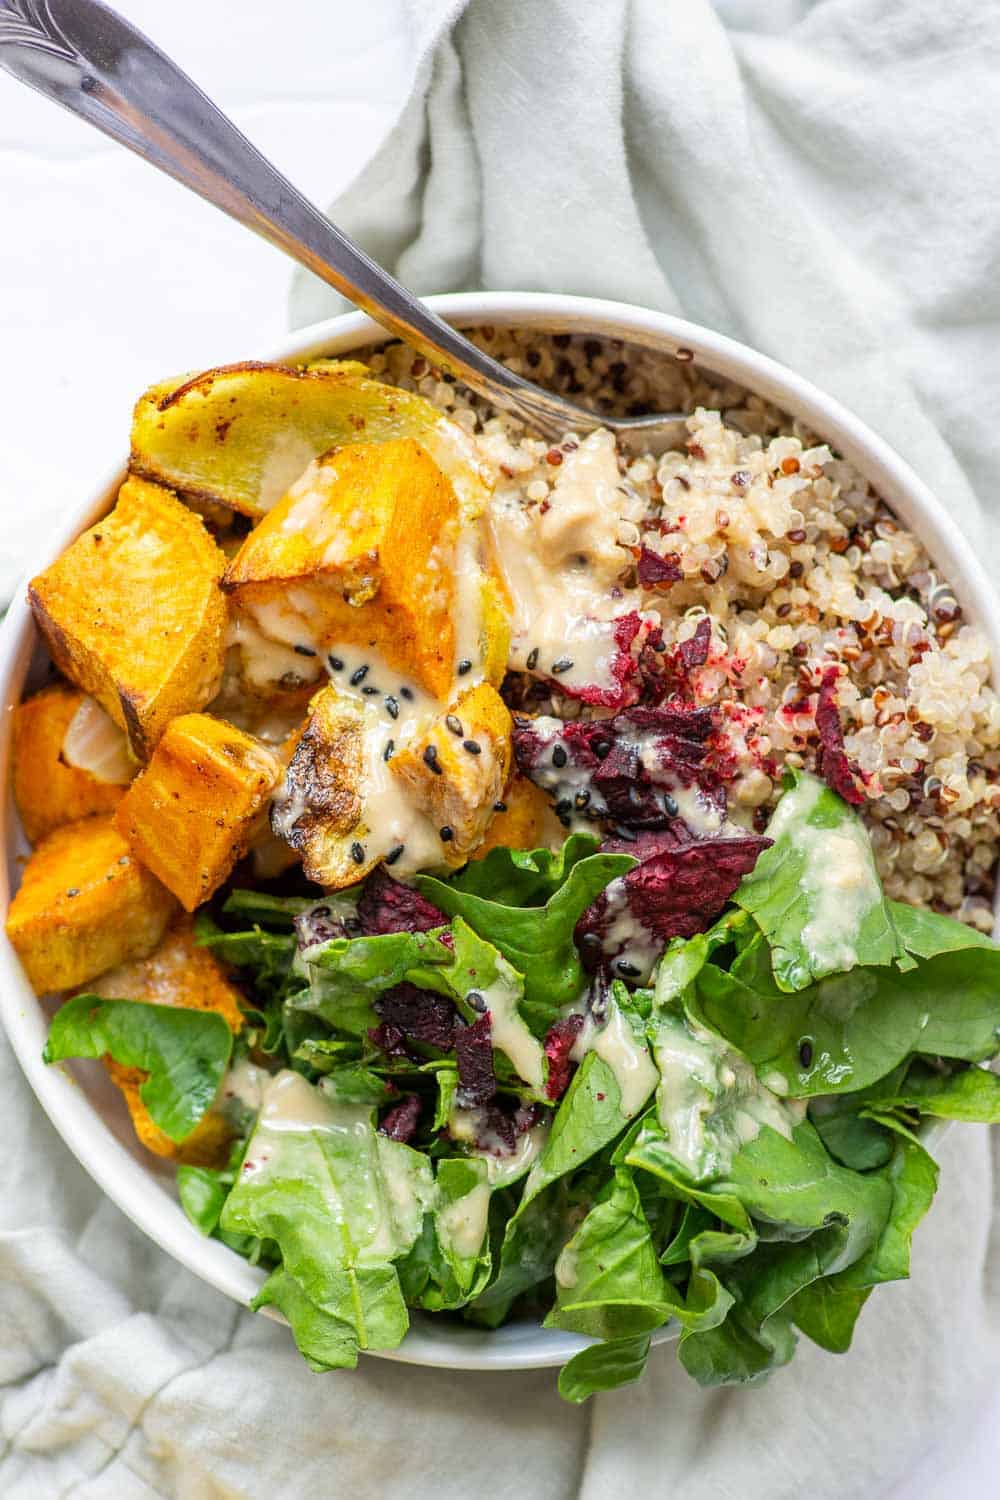 Looking for a warming, satisfying, and easy plant-based meal that takes under 30 minutes to make? This vegan buddha bowl recipe is everything you’ve been looking for and more! From the savory sweet potatoes, to the slightly sweet balance of beet chips, this bowl is nutritious, simple, and delicious. || The Butter Half #easylunch #easydinner #easydinnerrecipes #buddhabowl #thebutterhalf